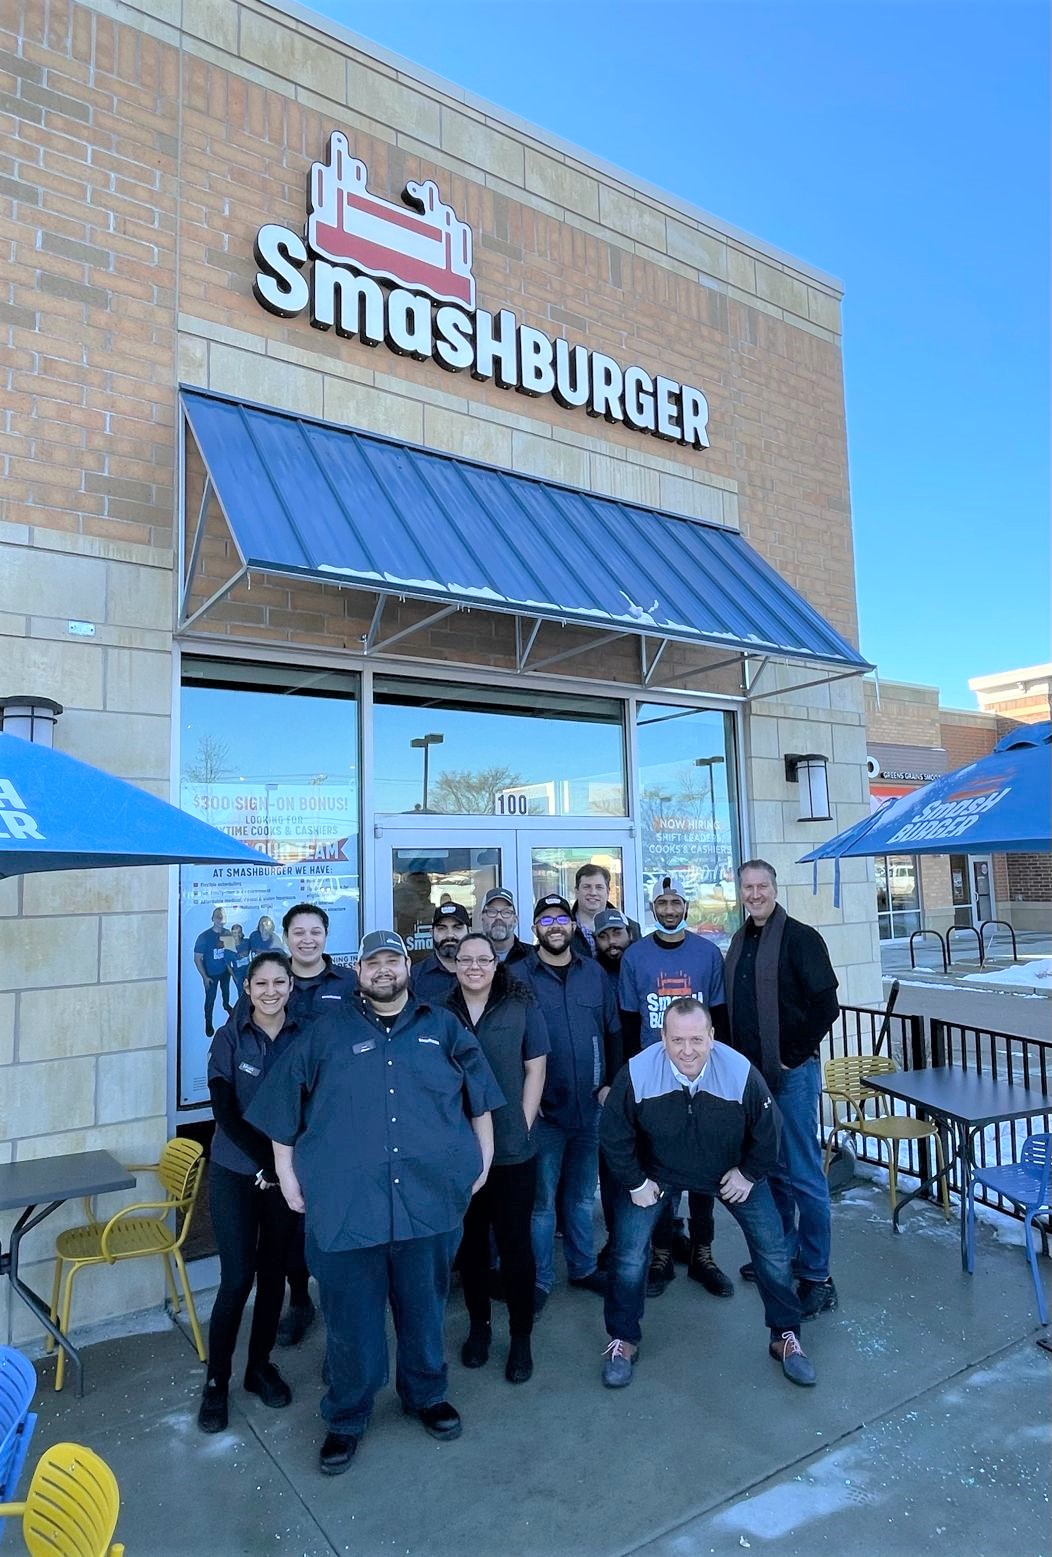 Phillips Edison & Co on X: "You're in for a SMASHING good time at #Naperville Crossings our newest Neighbors now open – welcome @Smashburger 🎉 As they continue their